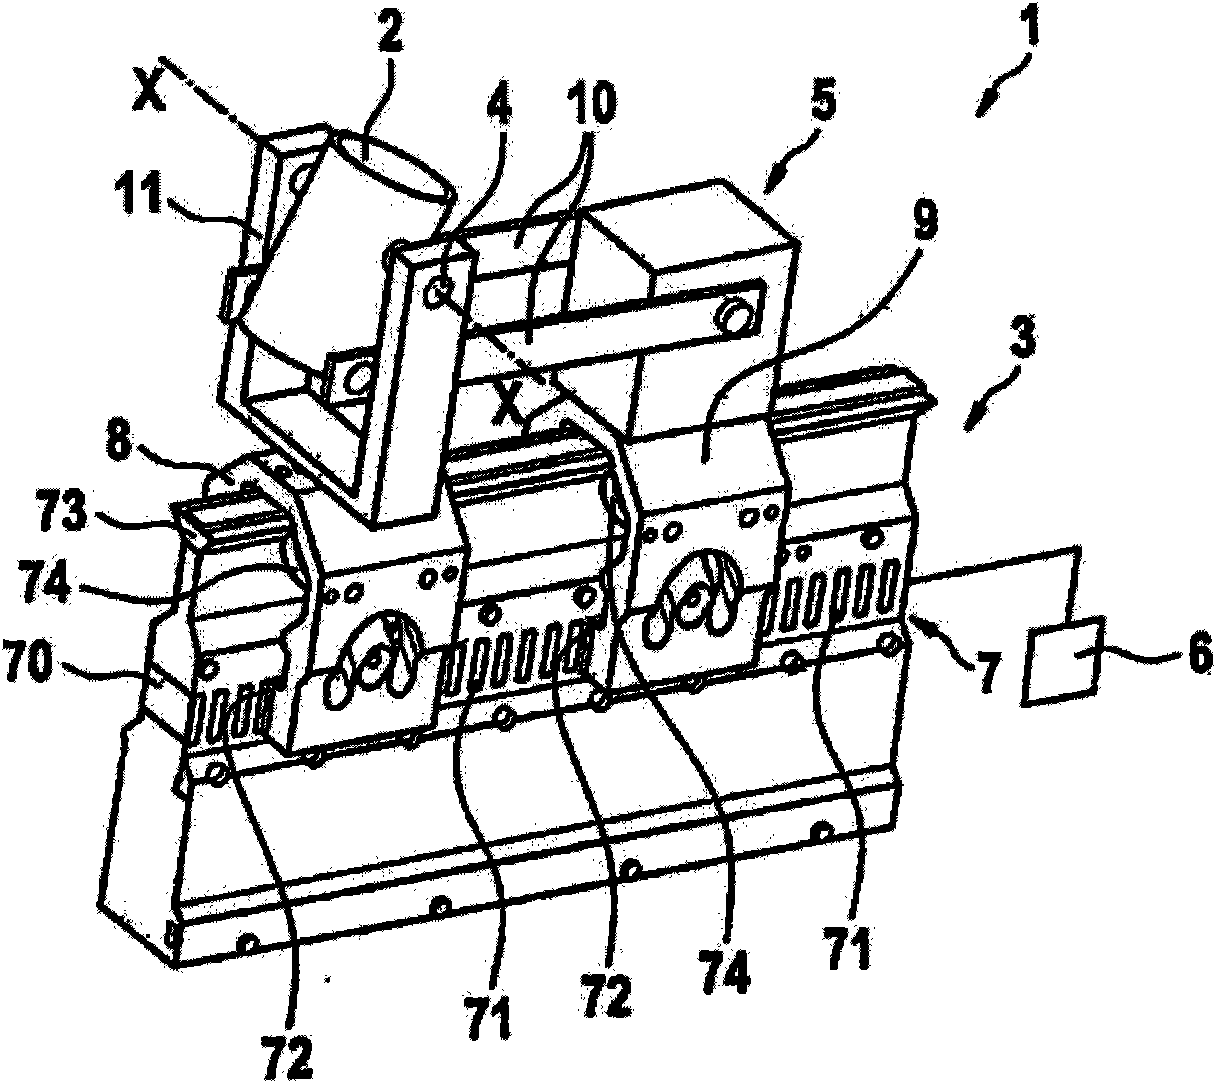 Device used for conveying liquid in container